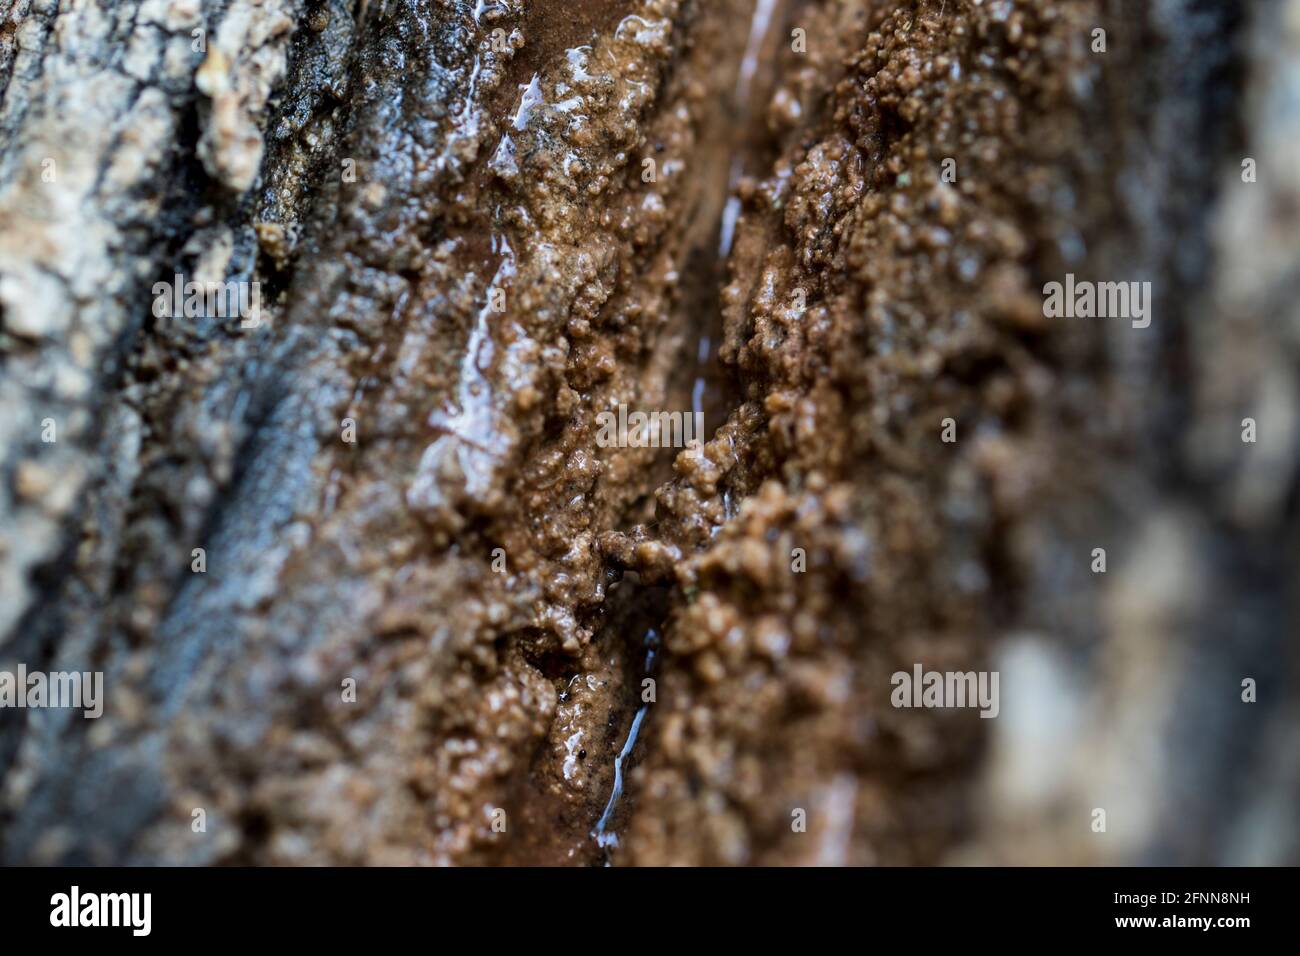 Slime flux infection wetwood bacterial disease on trees. Fungal infection of living trees. Stock Photo